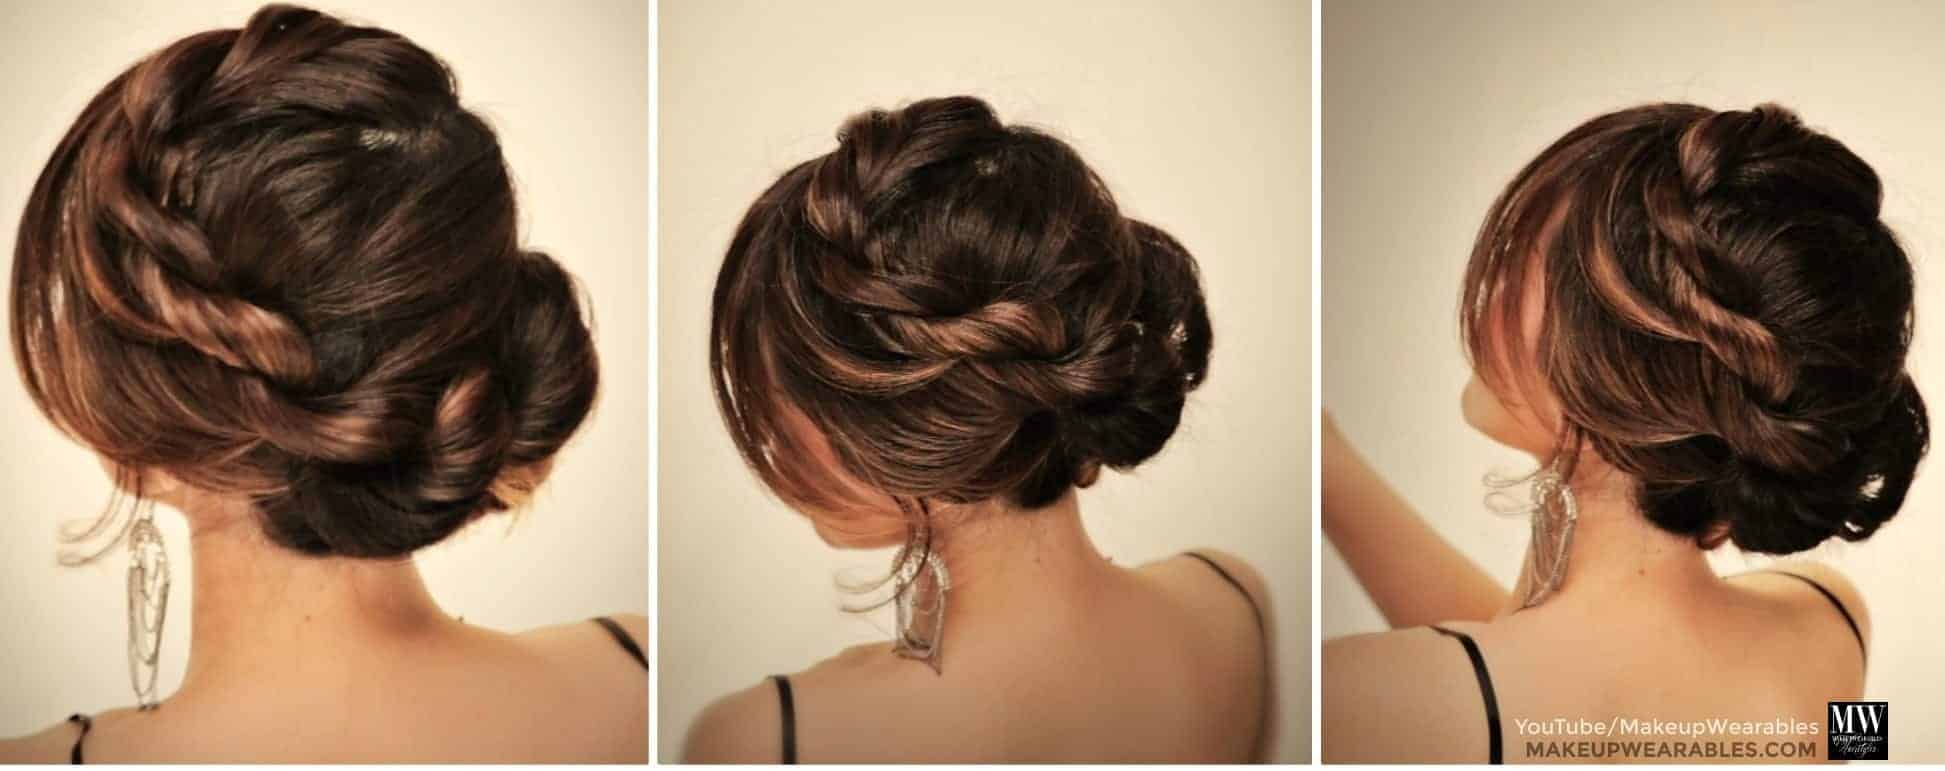 Easy Side Bun Hairstyles For Long Hair Life Style By Modernstorkcom